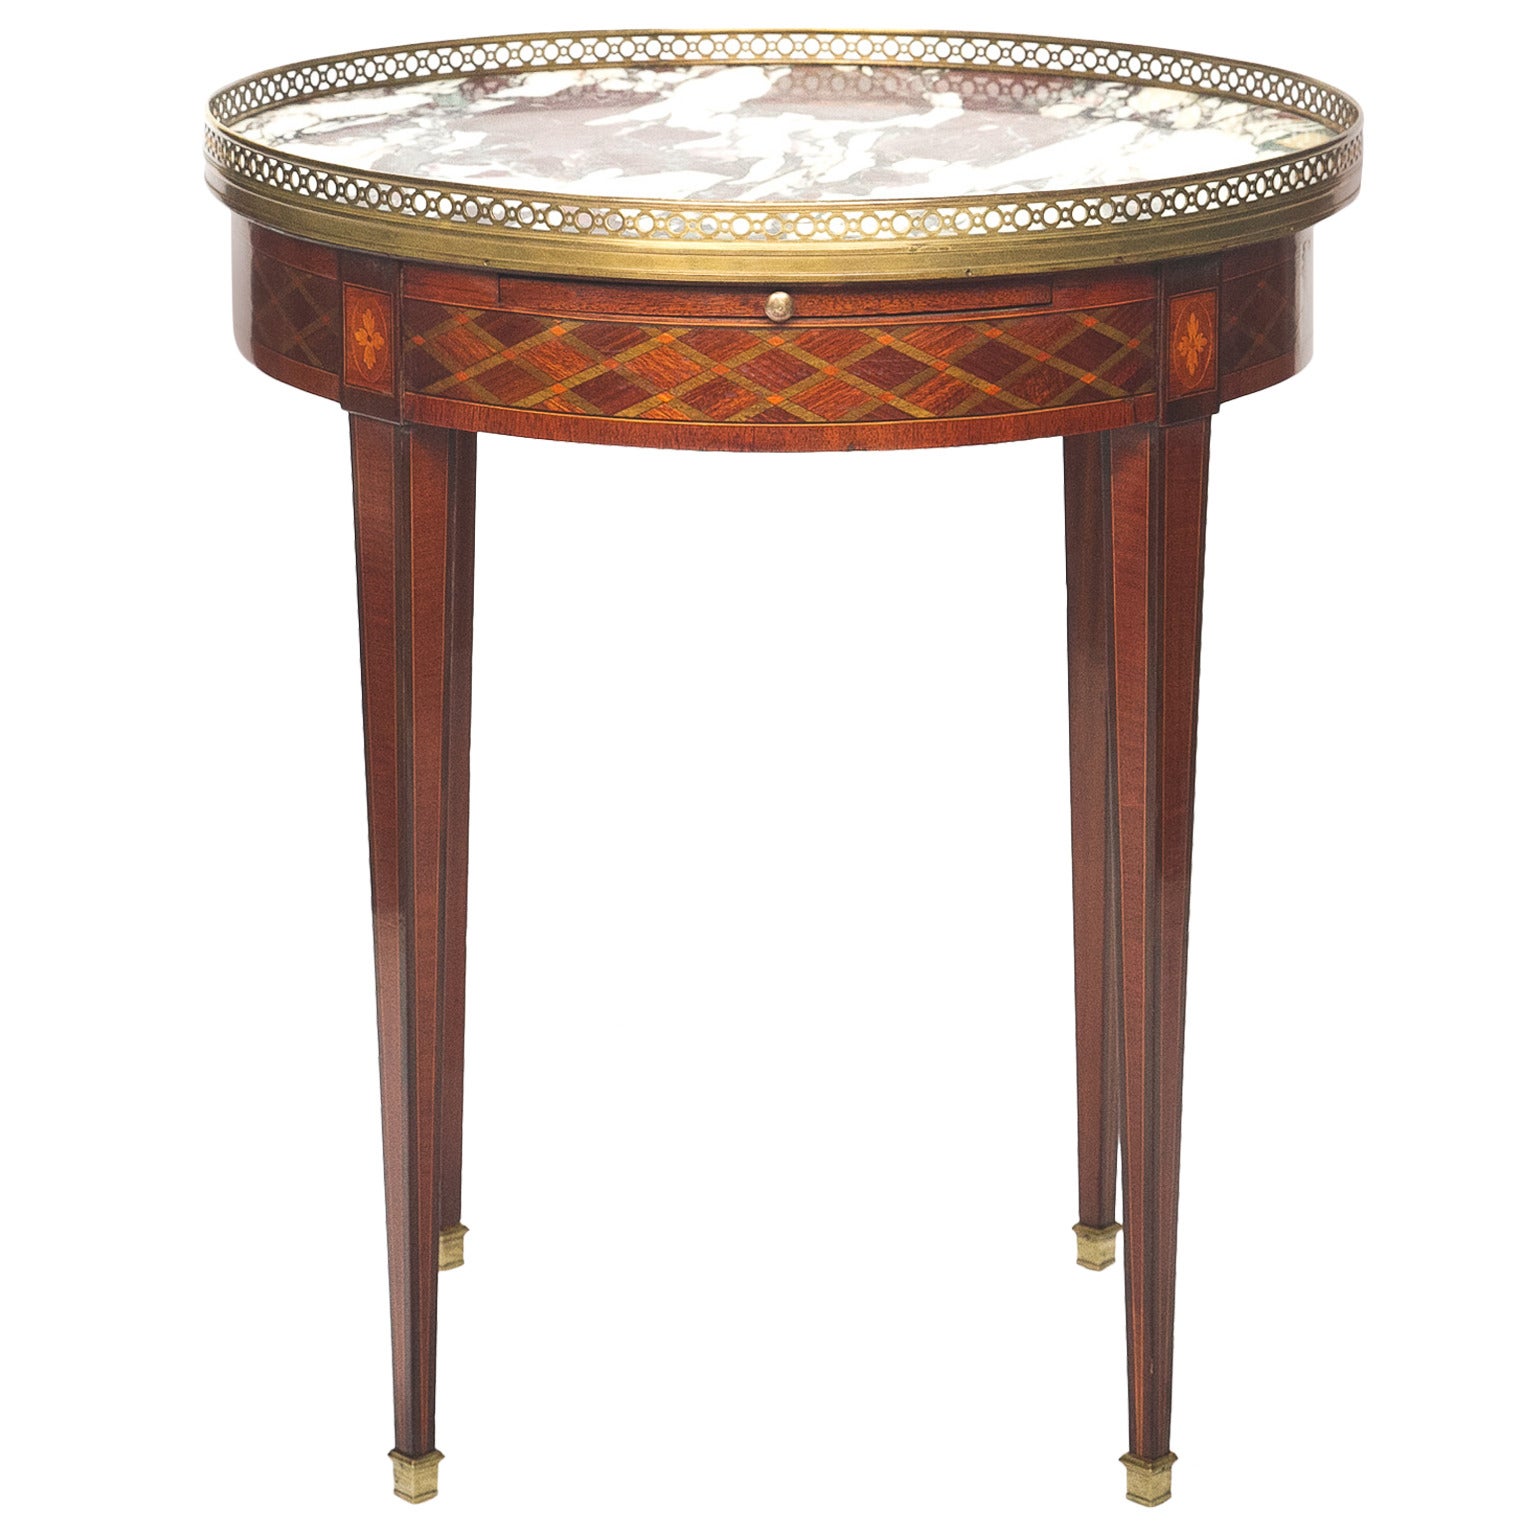 19th Century French Bouillotte Table